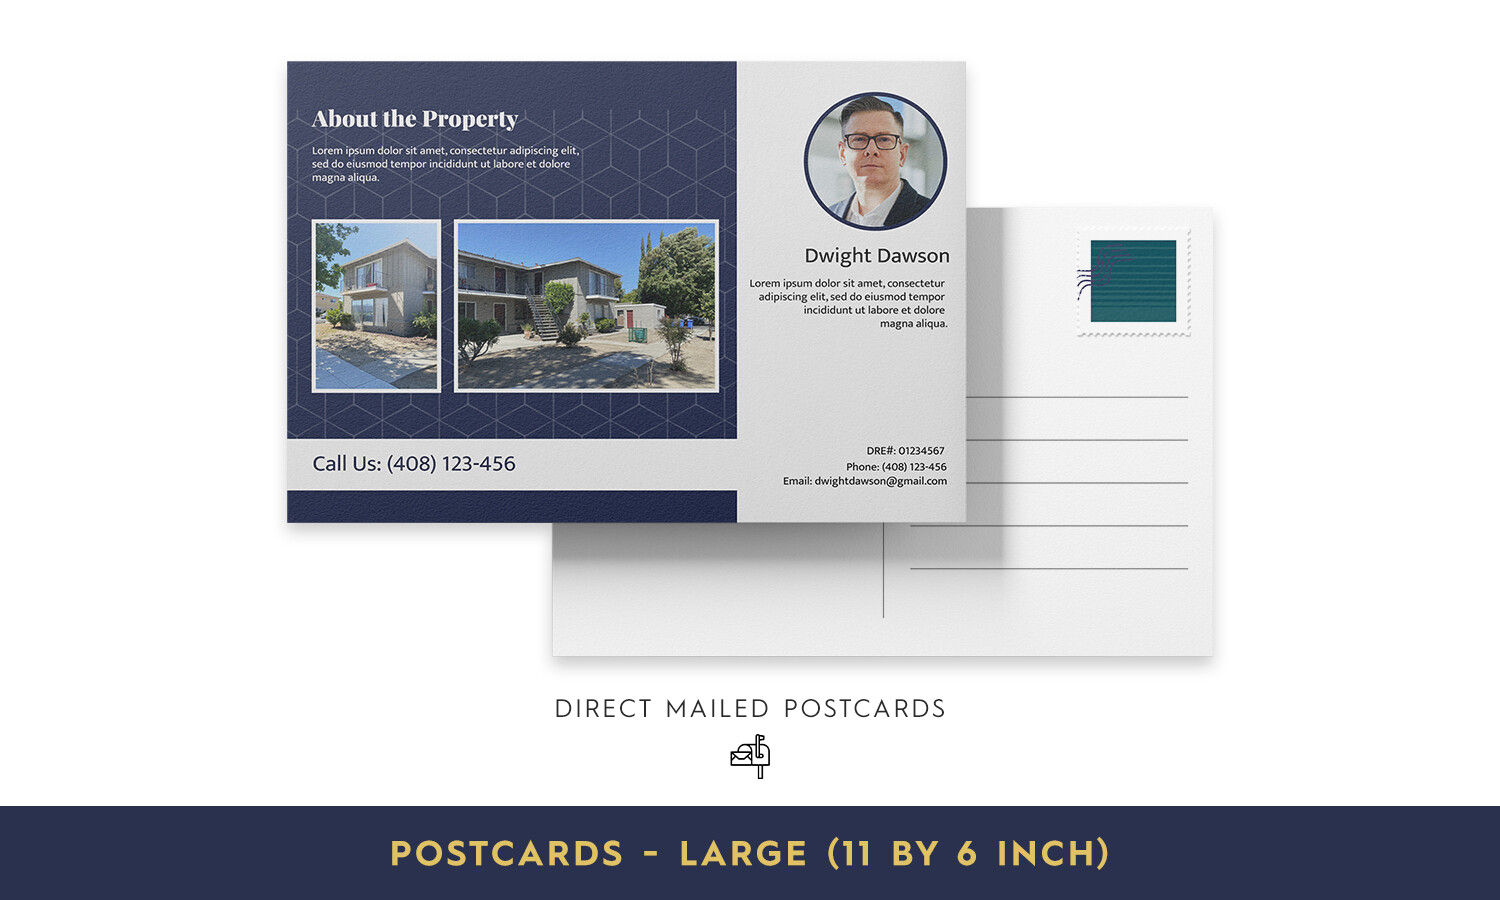 Direct Mailed Postcards - Large